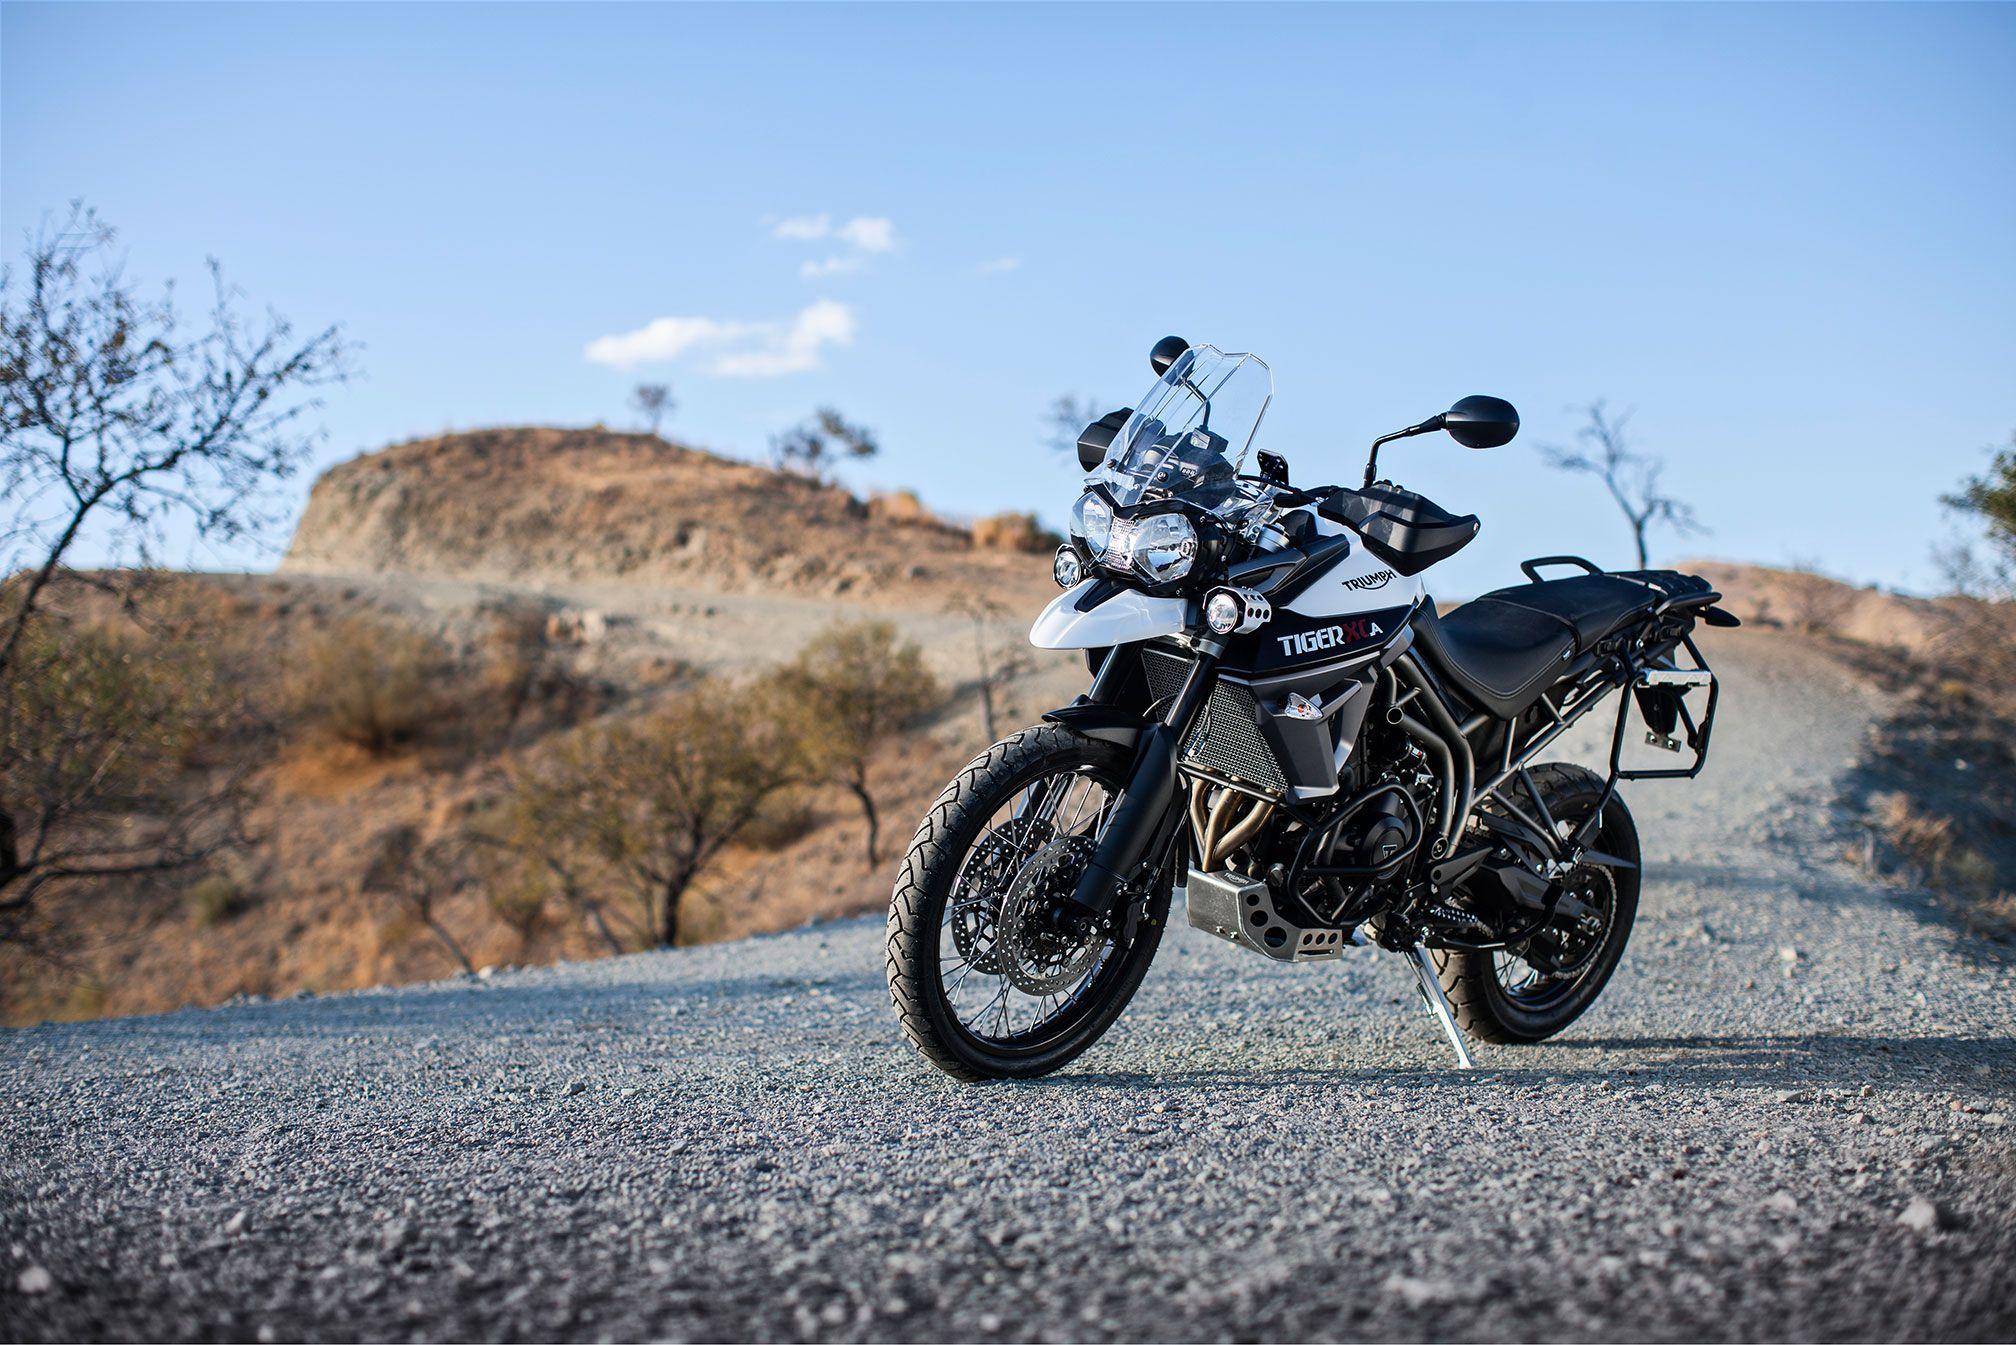 Triumph Tiger 800 XCA Launched In India At Rs. 13.75 Lakhs Ex